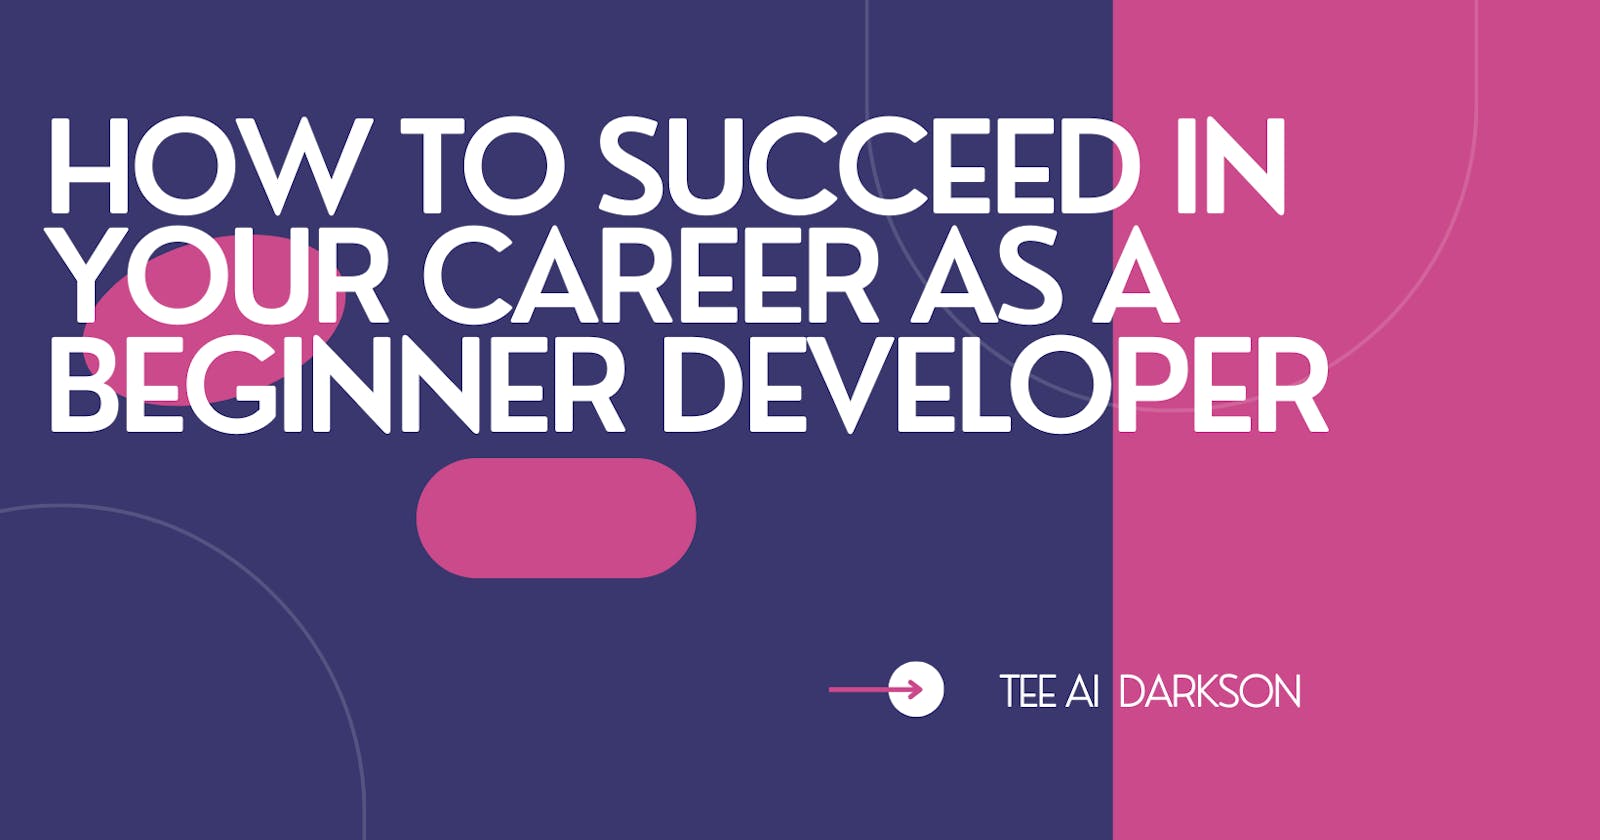 How To Succeed In Your Career As A Beginner Developer